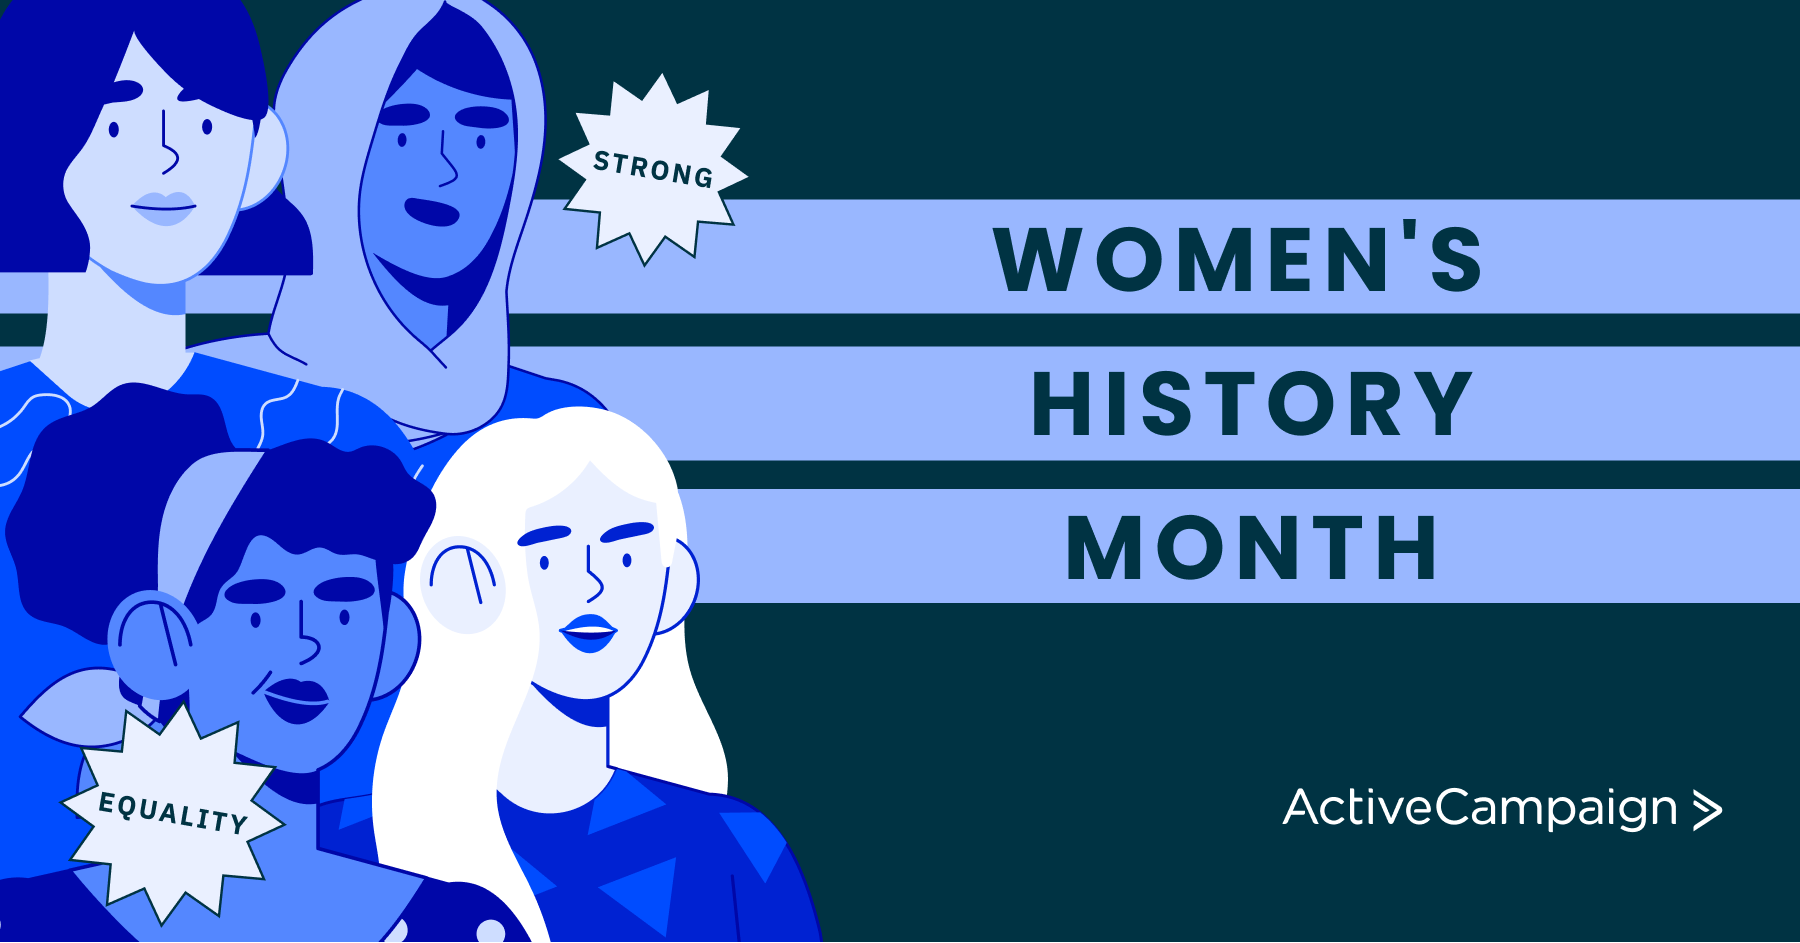 Celebrating Women’s History Month at ActiveCampaign